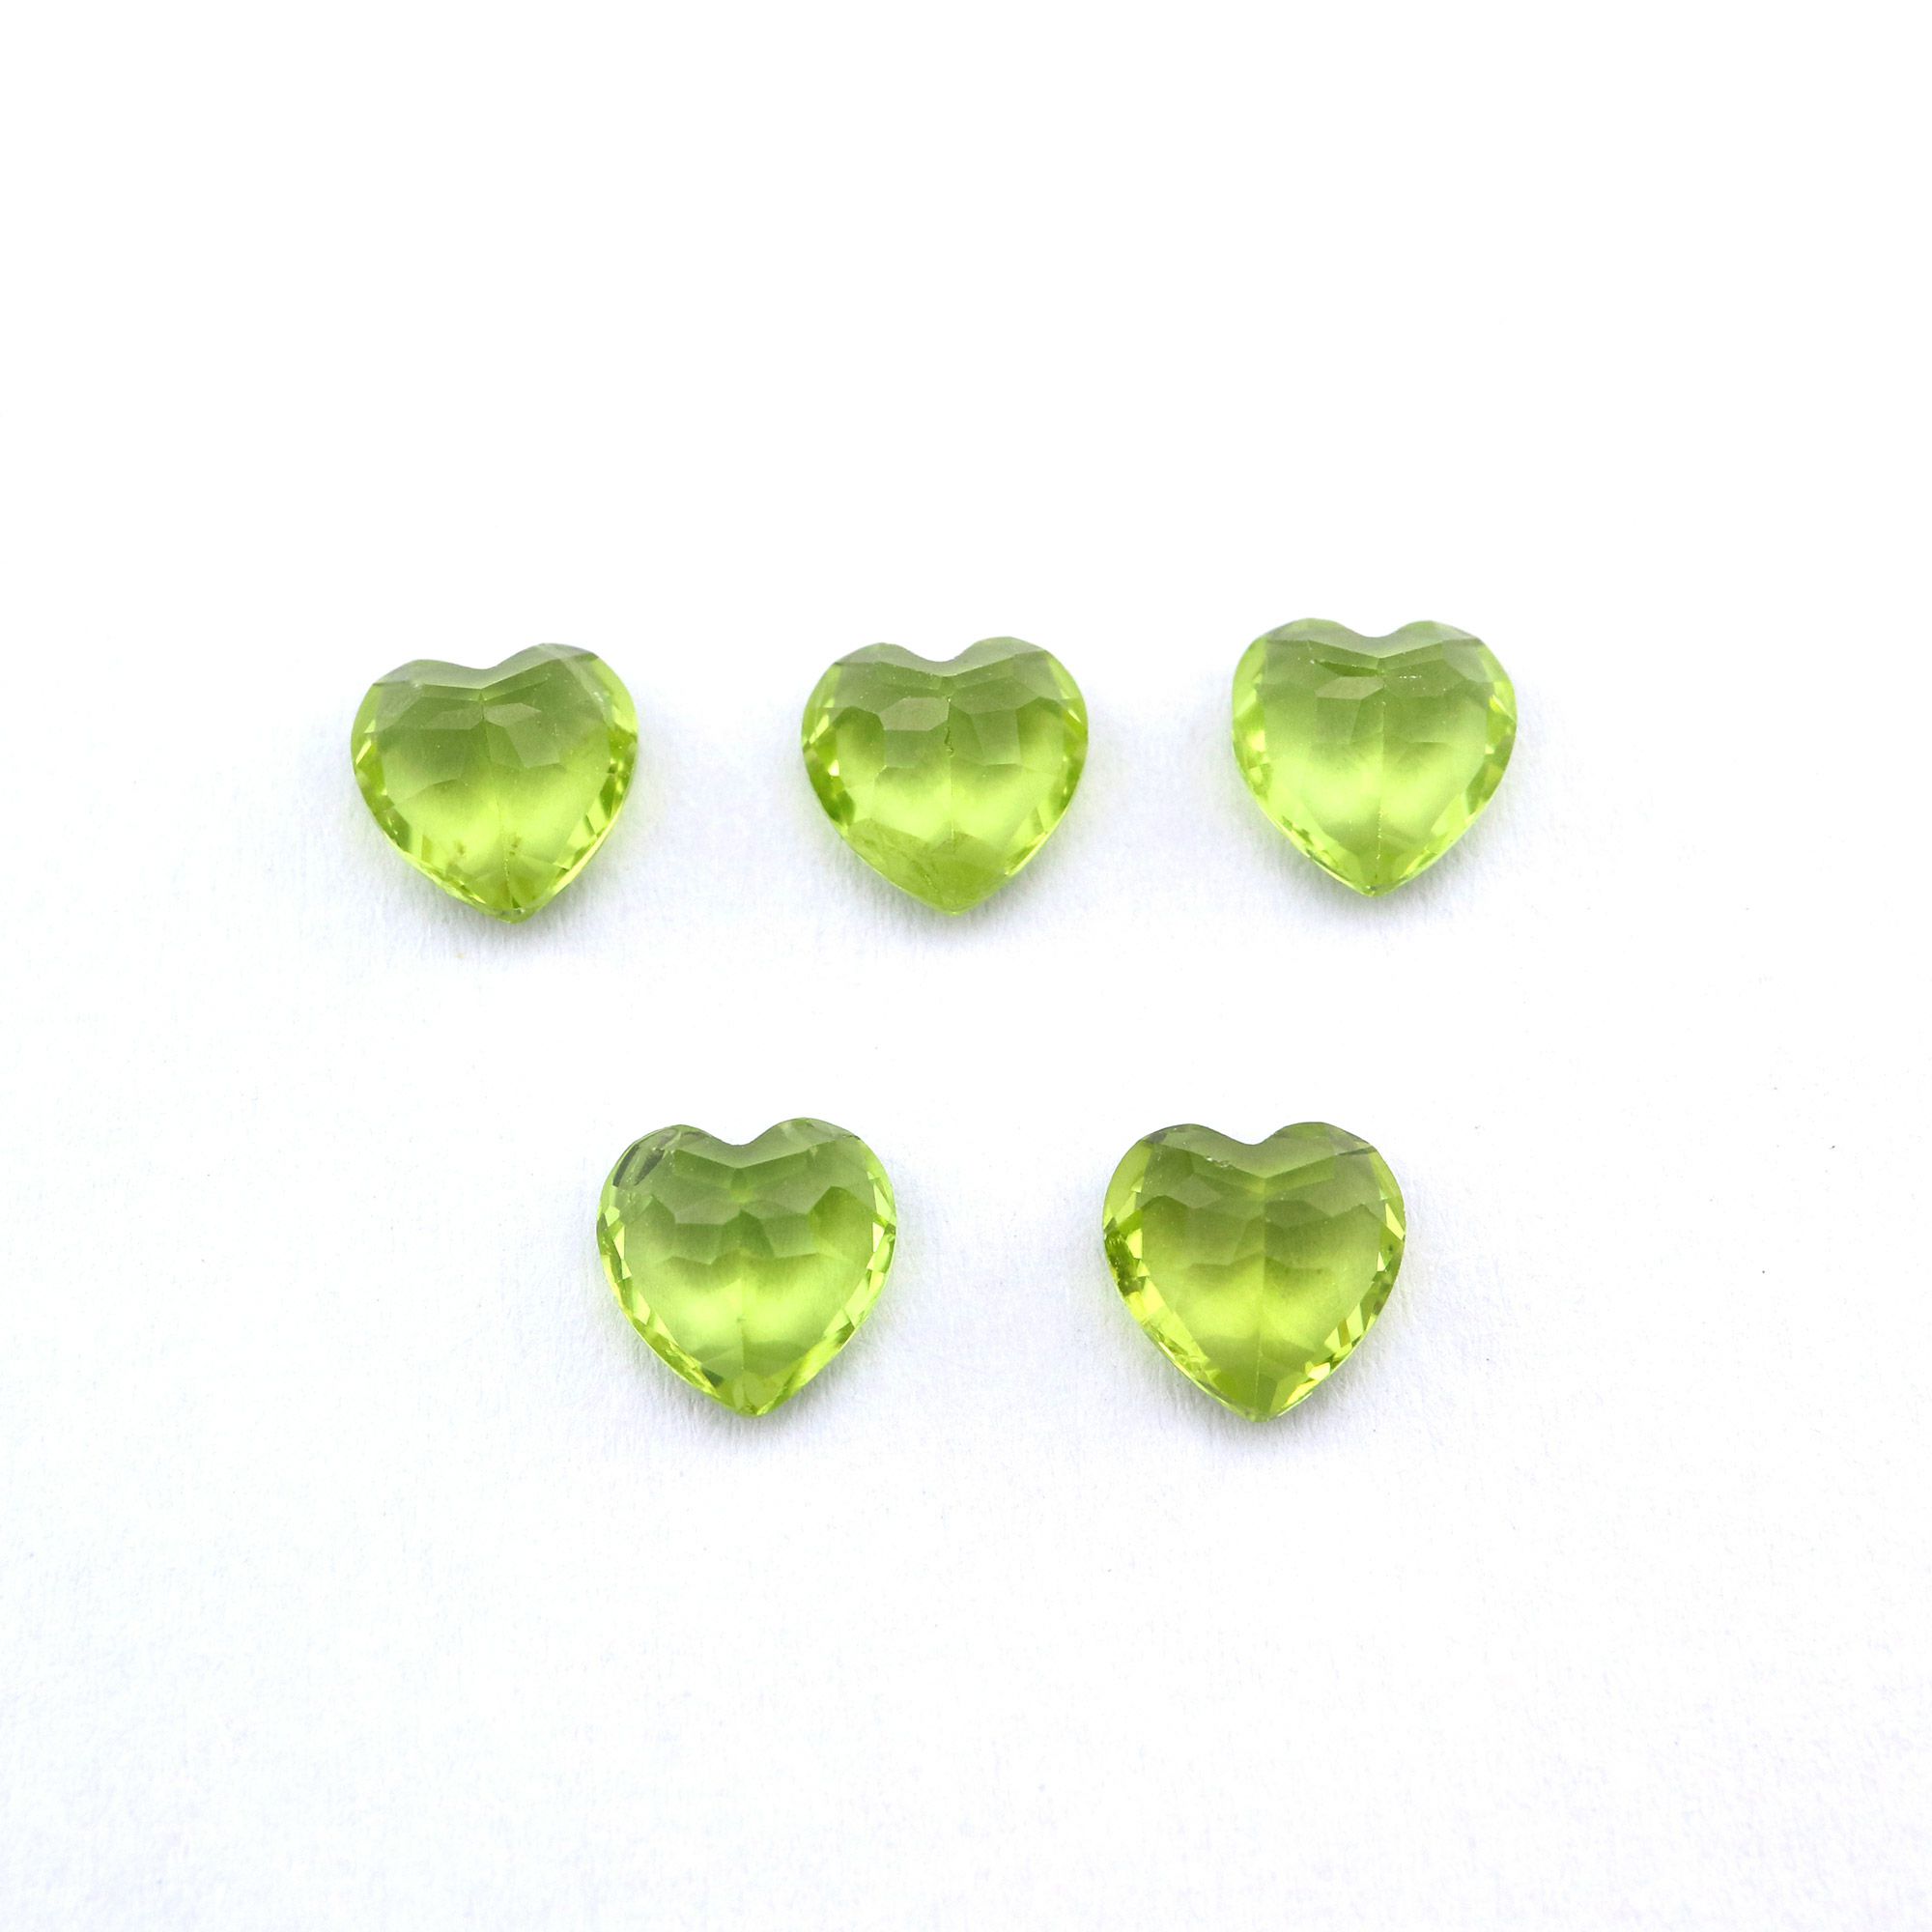 5Pcs 4-8MM Heart Green Peridot August Birthstone Faceted Cut Loose Gemstone Natural Semi Precious Stone DIY Jewelry Supplies 4130010 - Click Image to Close